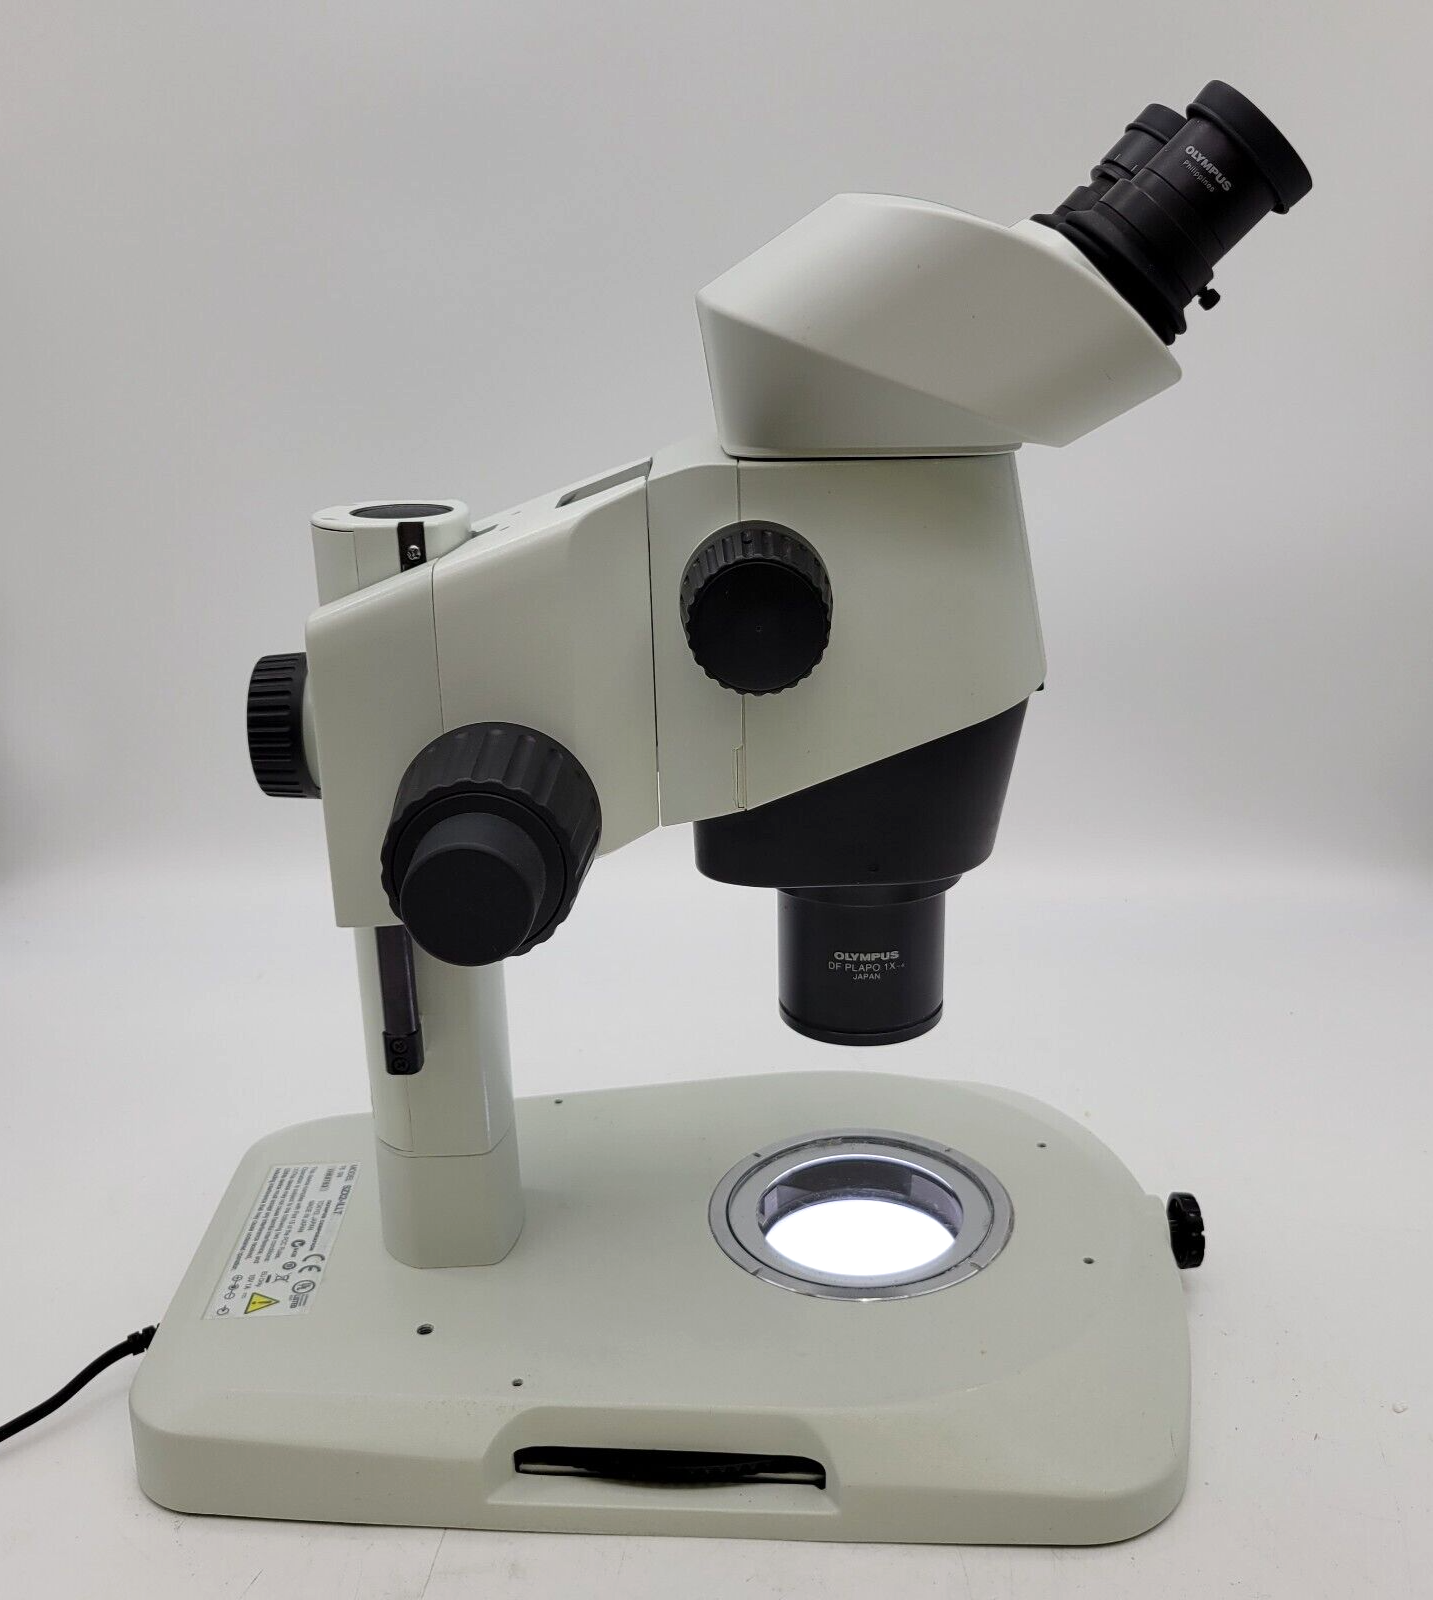 Olympus Stereo Microscope SZX10 w. Slim LED Transmitted Light Base BF/DF/Oblique - microscopemarketplace